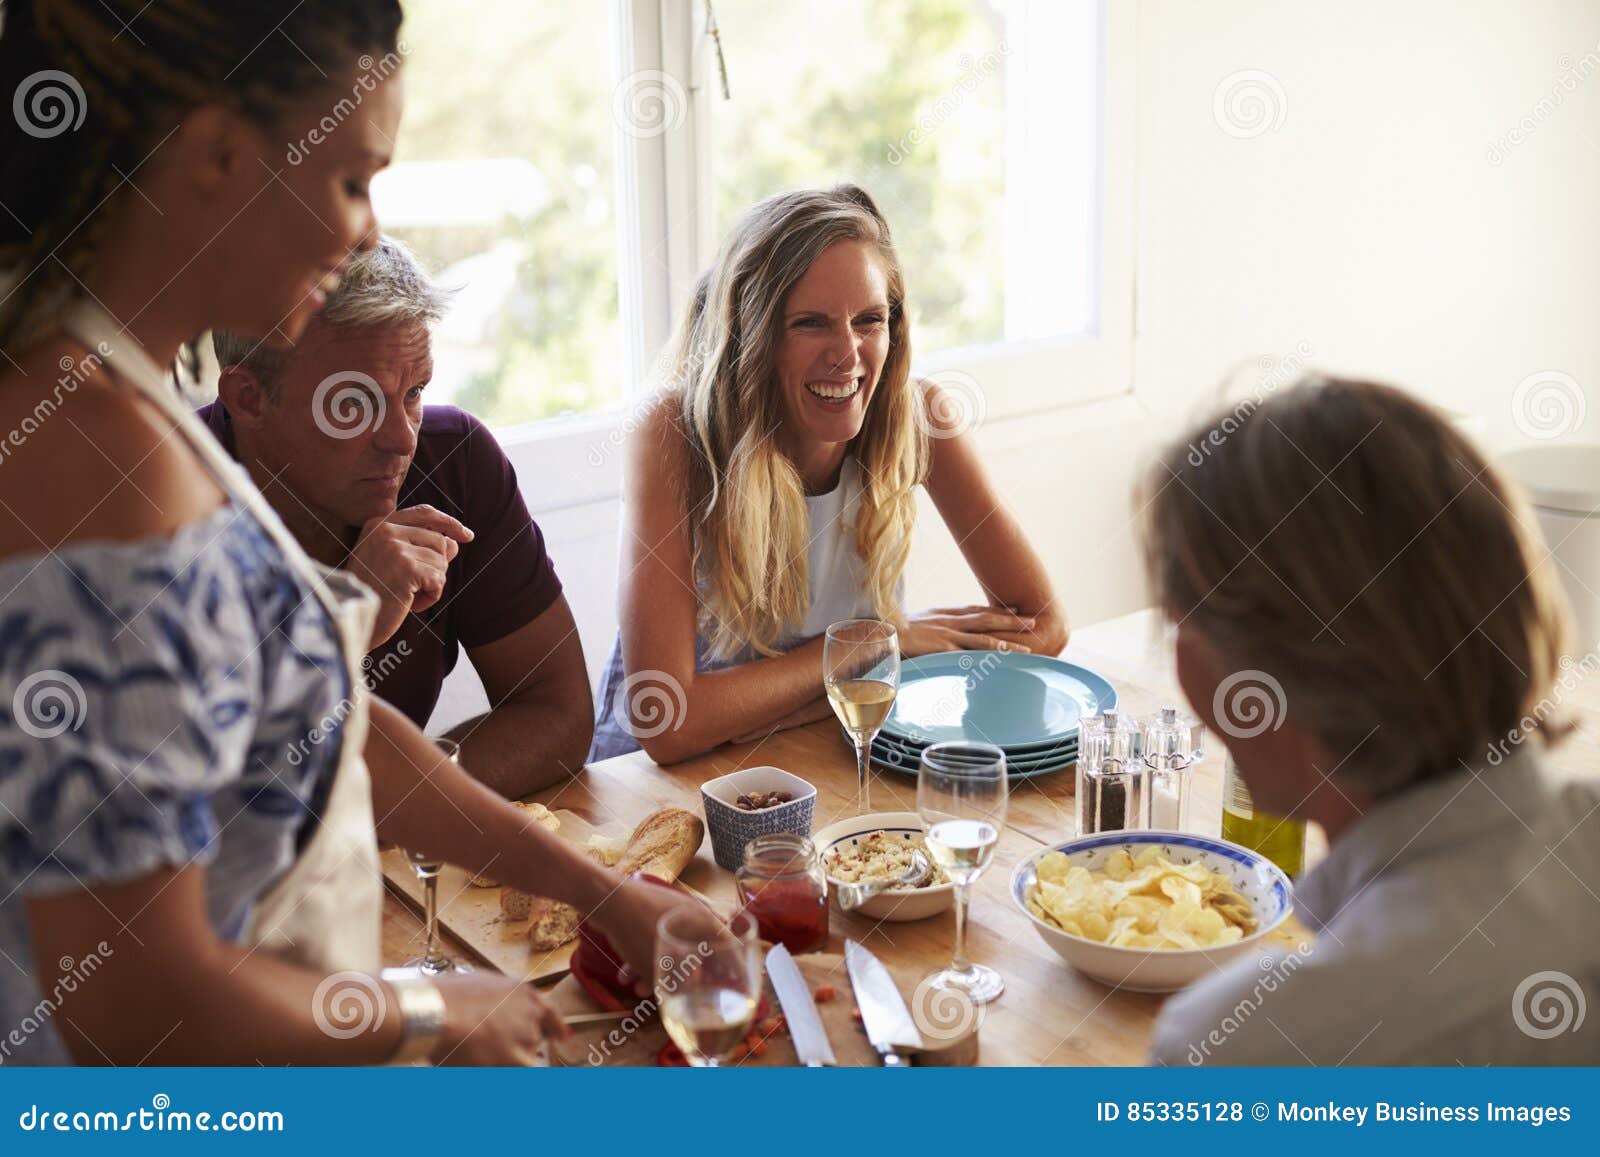 people talking across the kitchen table in asia